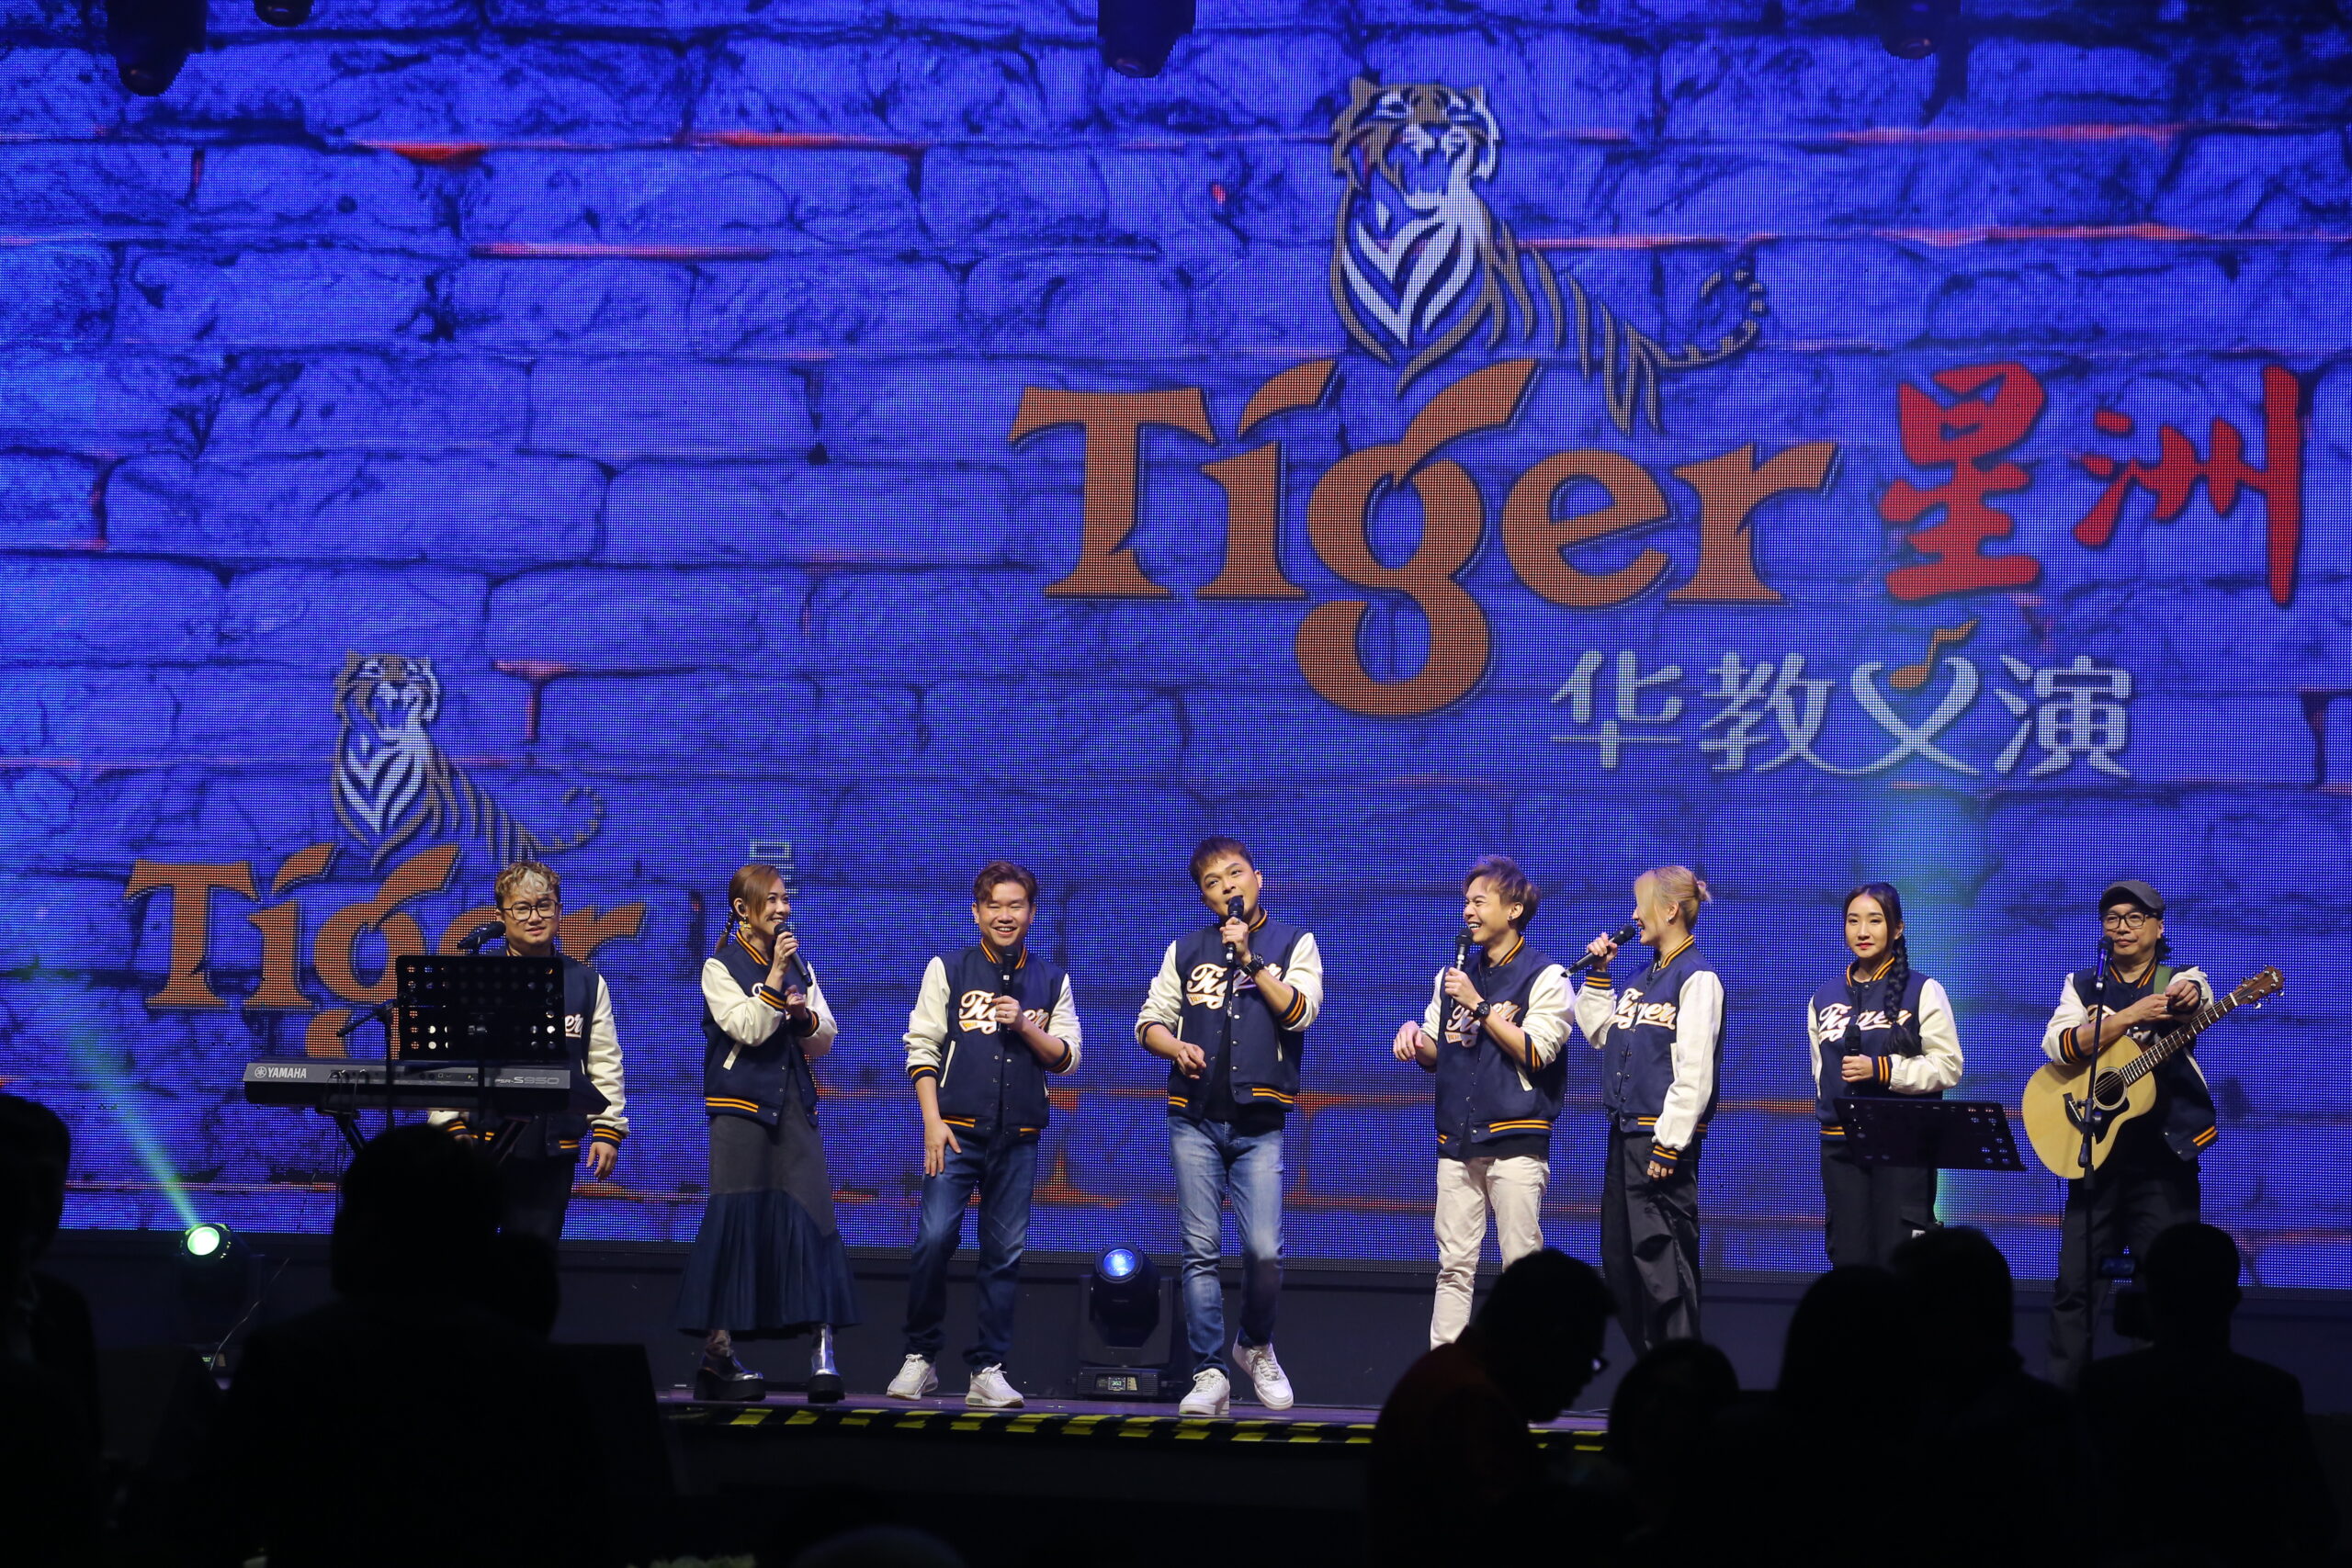 Unplugged session on tiger chinese education charity concert